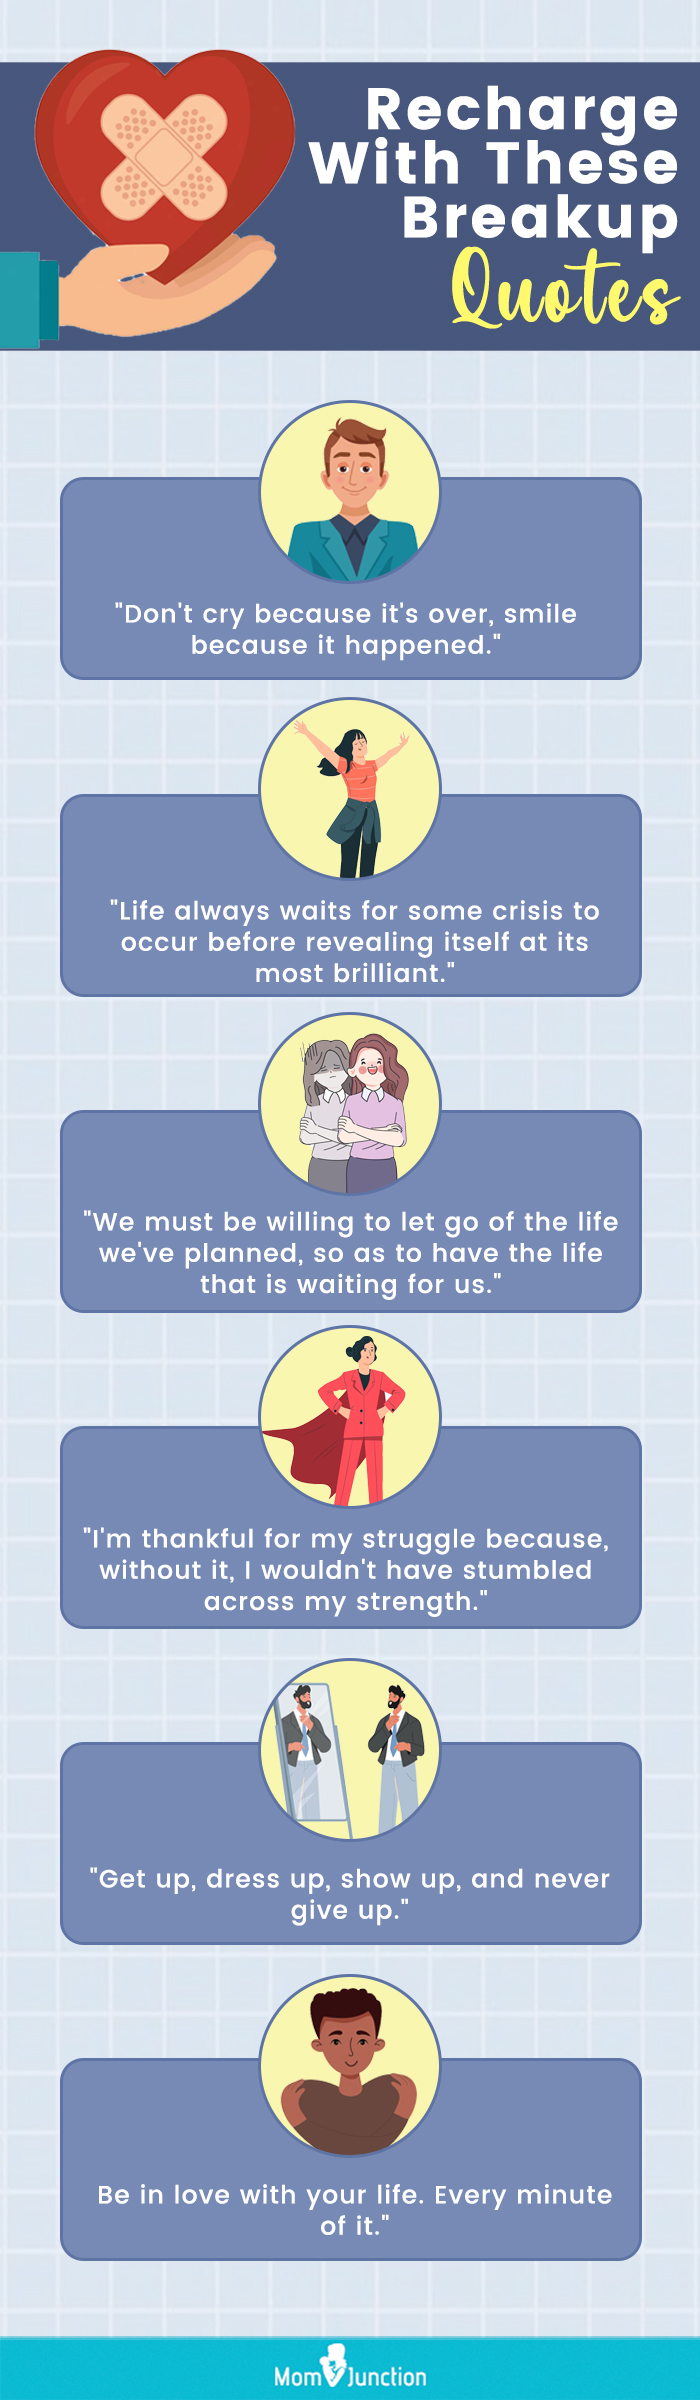 recharge with these breakup quotes [infographic]